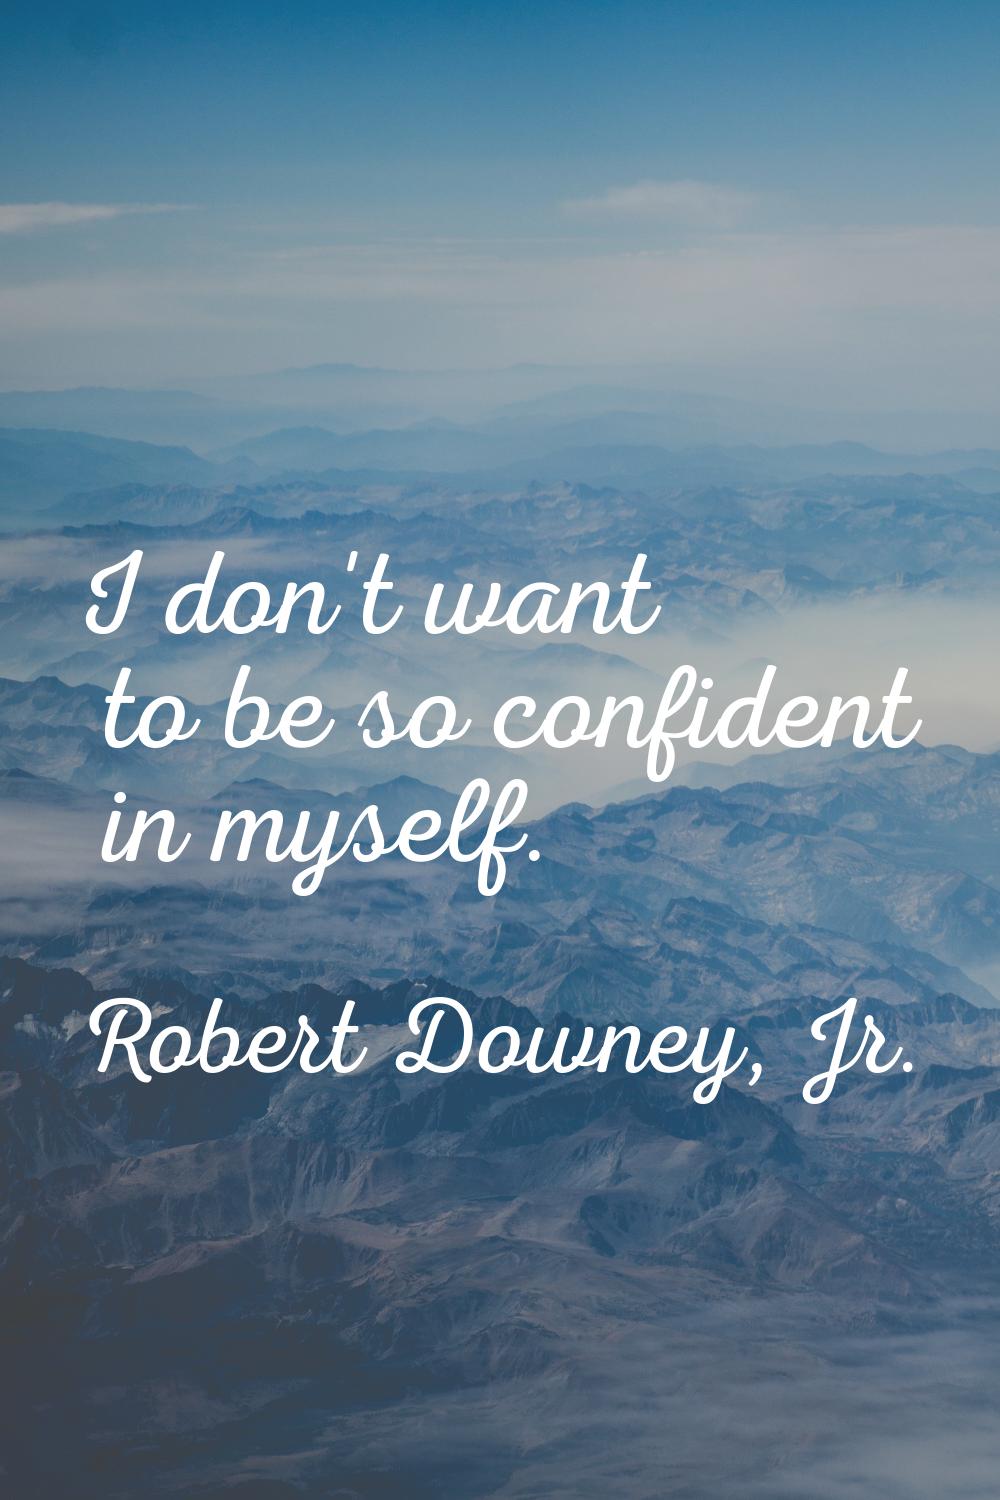 I don't want to be so confident in myself.